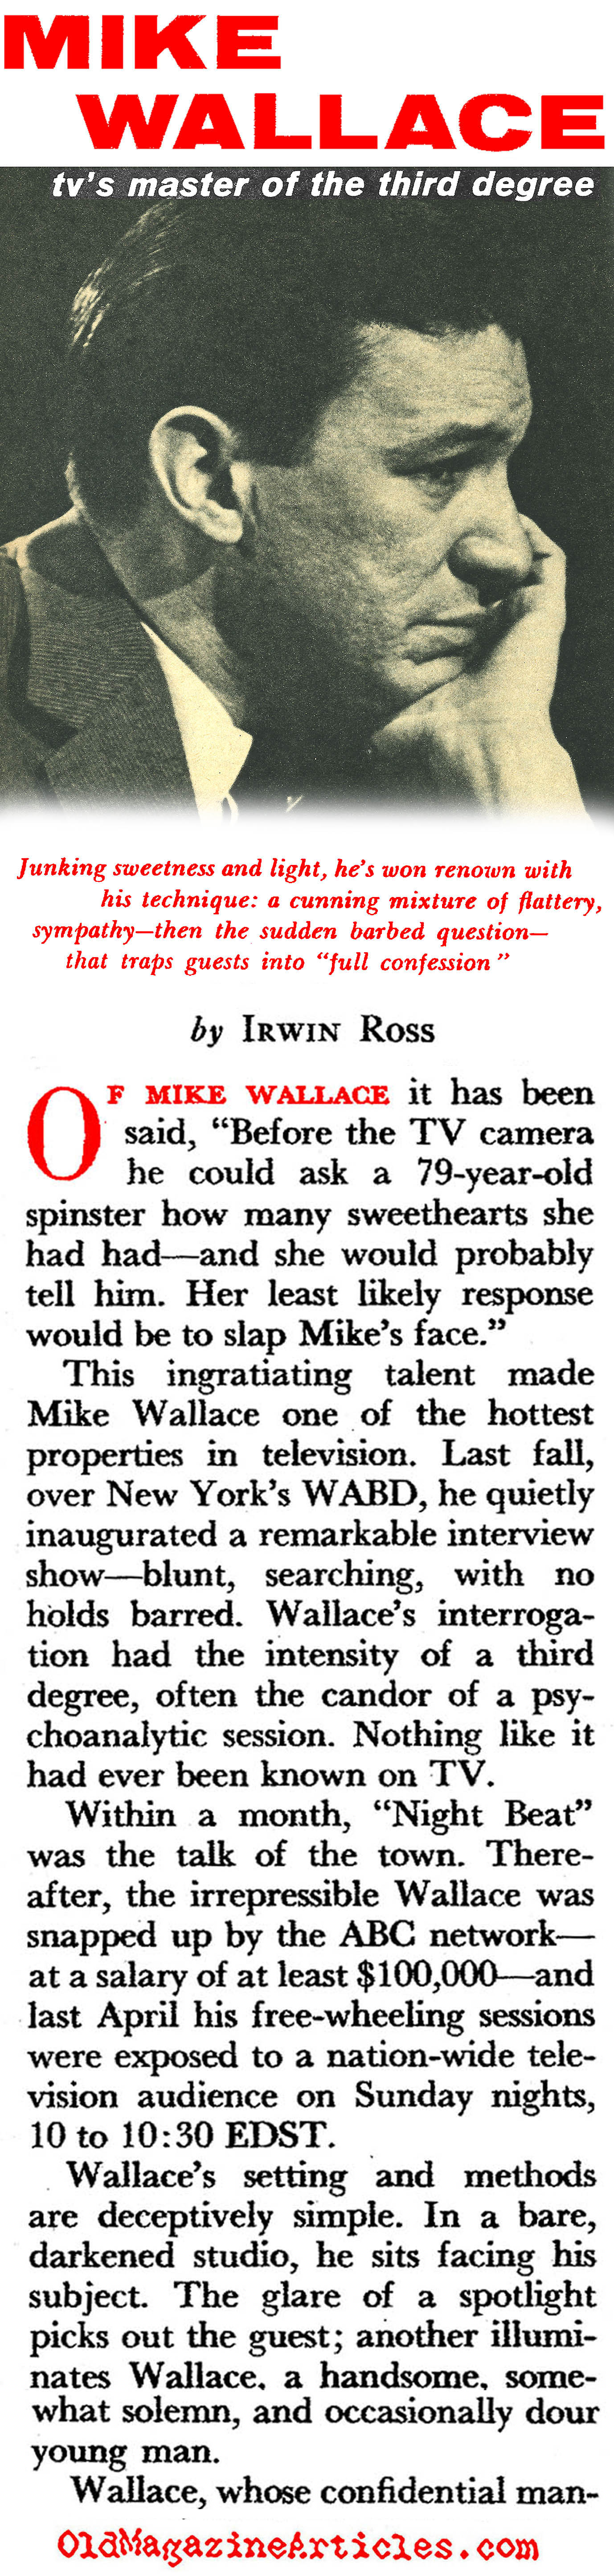 Mike Wallace of ABC (Pageant Magazine, 1957)